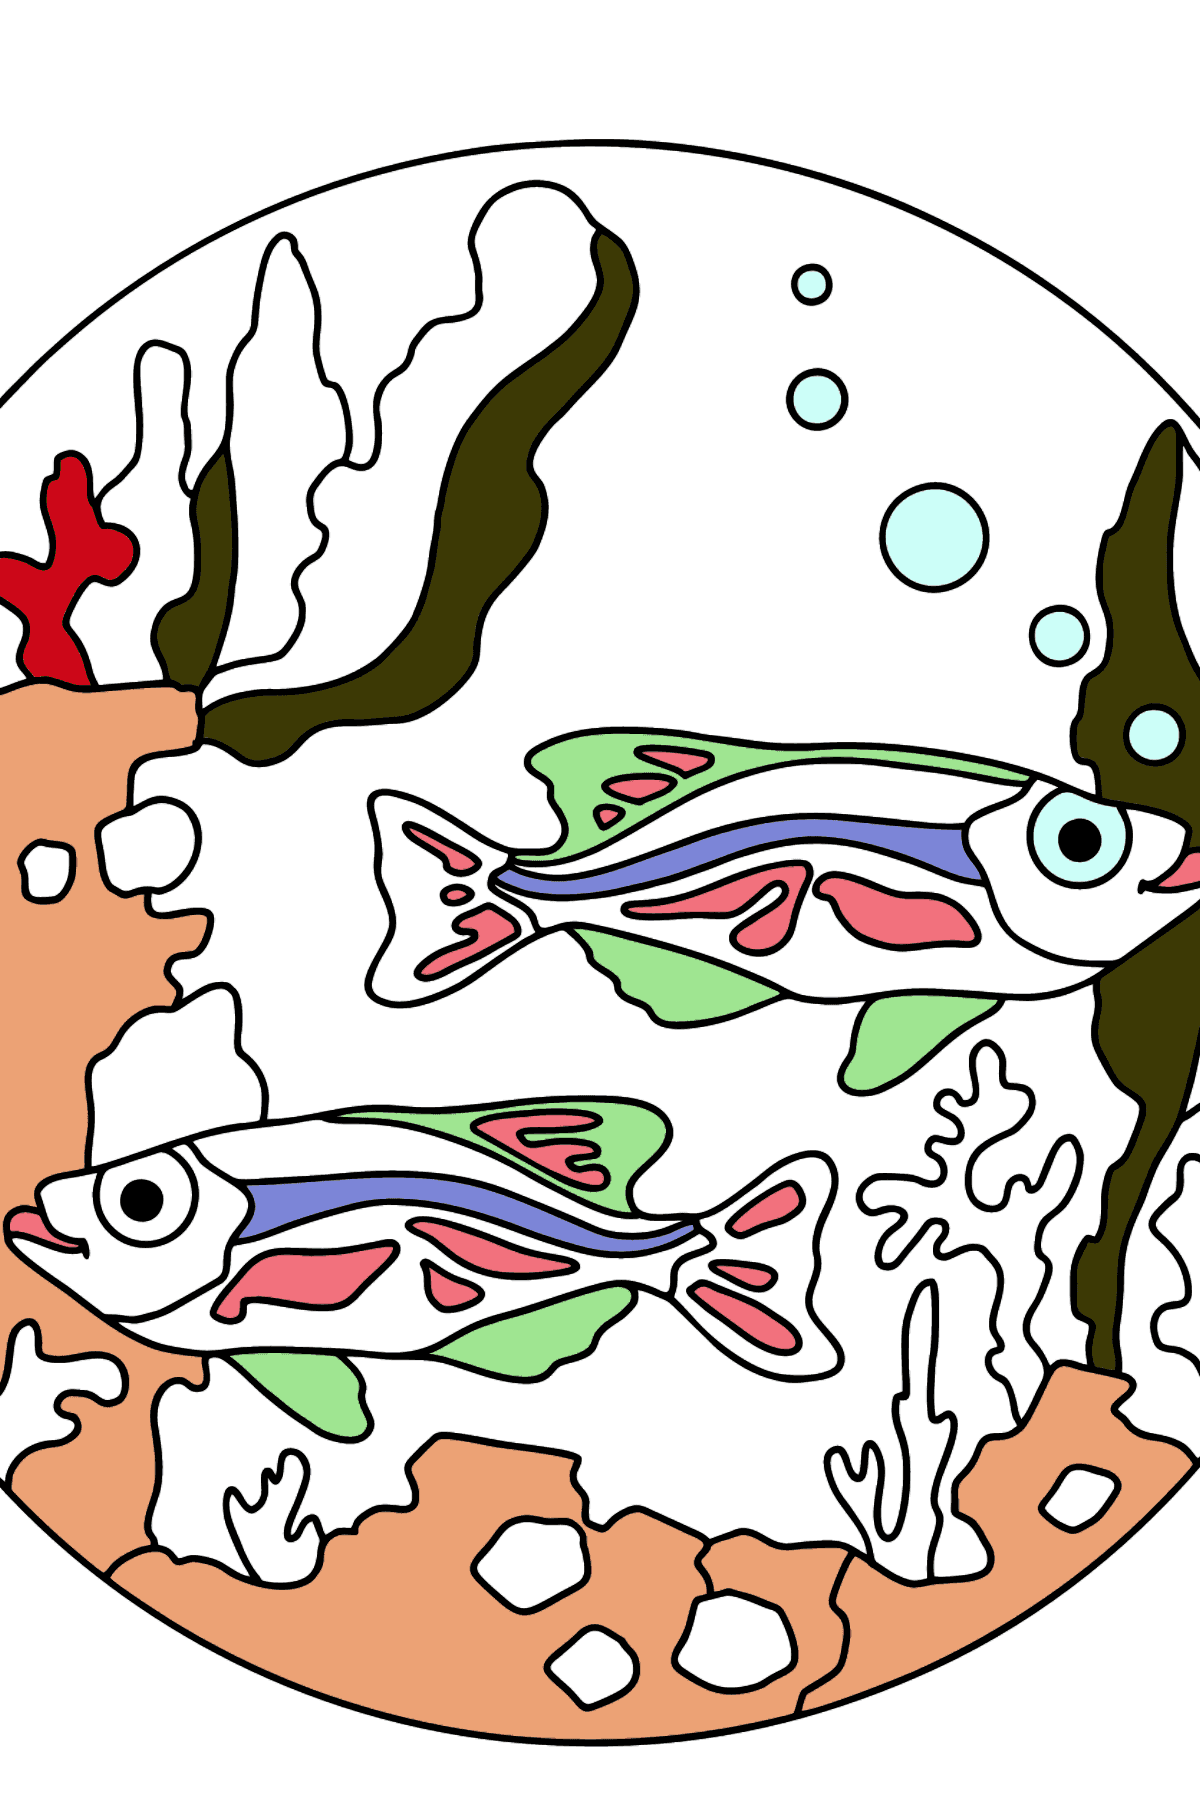 Coloring Page - Fish are Swimming Together Peacefully - Coloring Pages for Kids